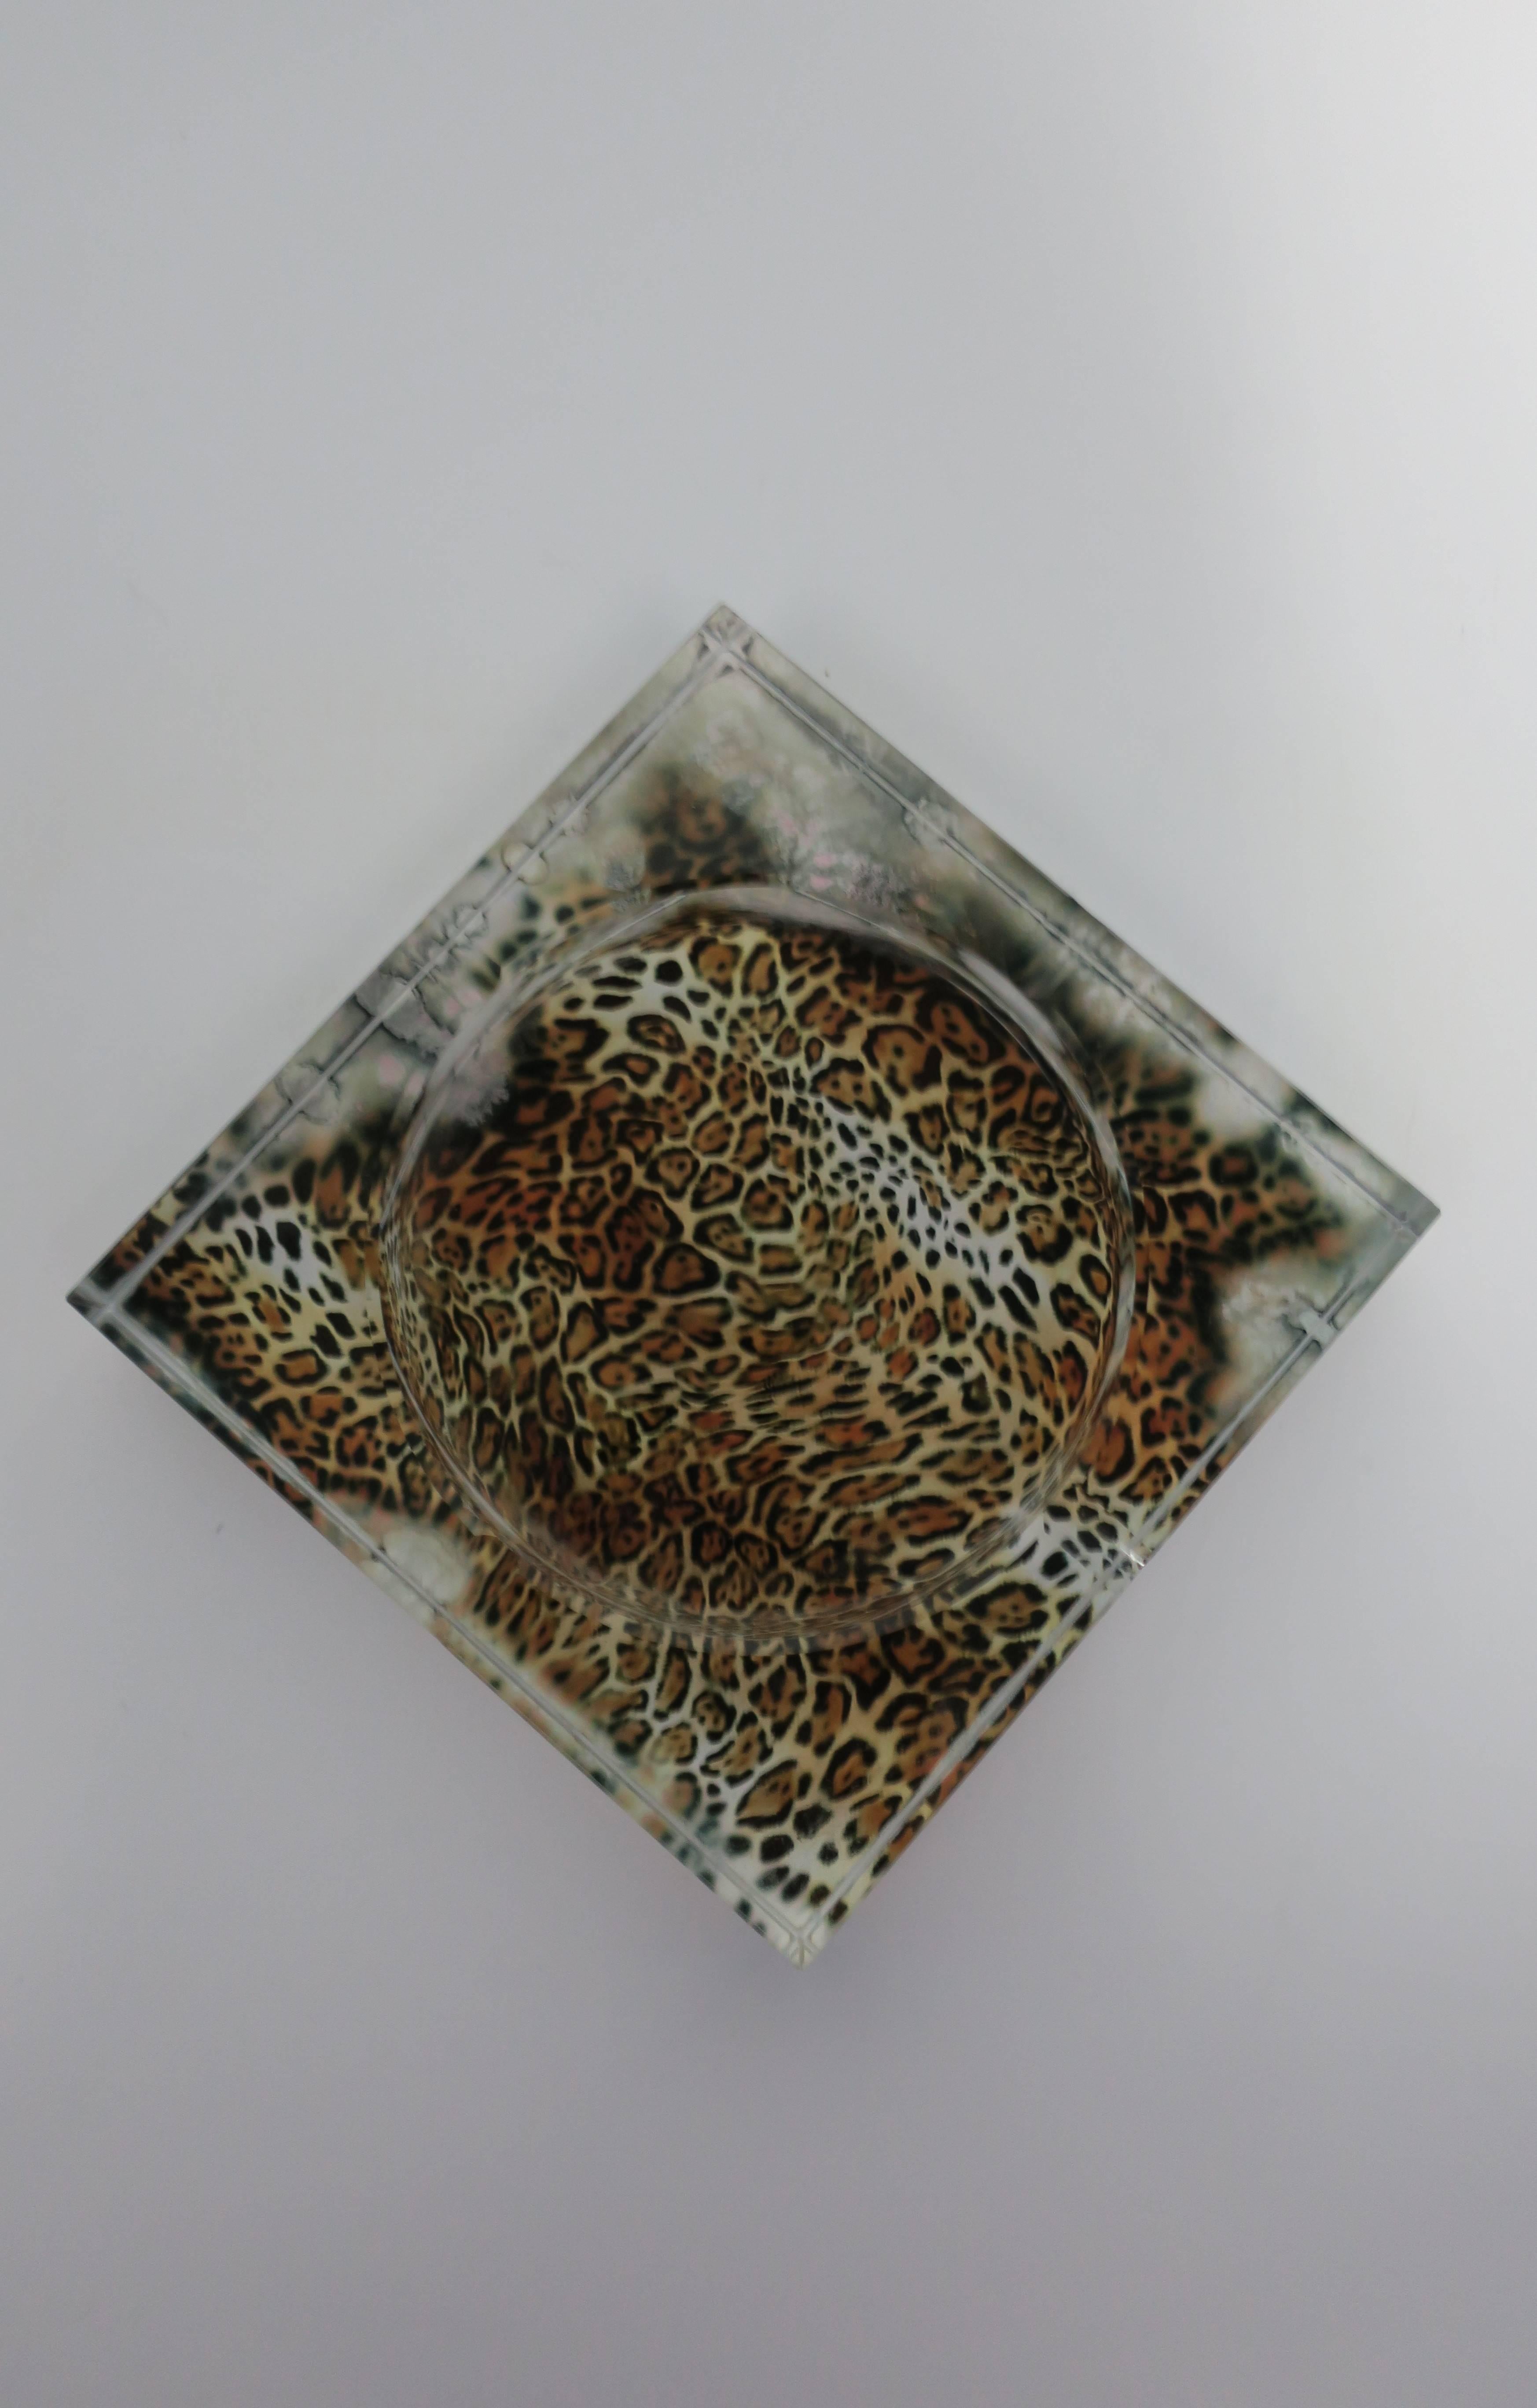 A chic clear glass vessel or ashtray decorated with a faux leopard skin bottom. Four intentional indents on top. Measures: 6